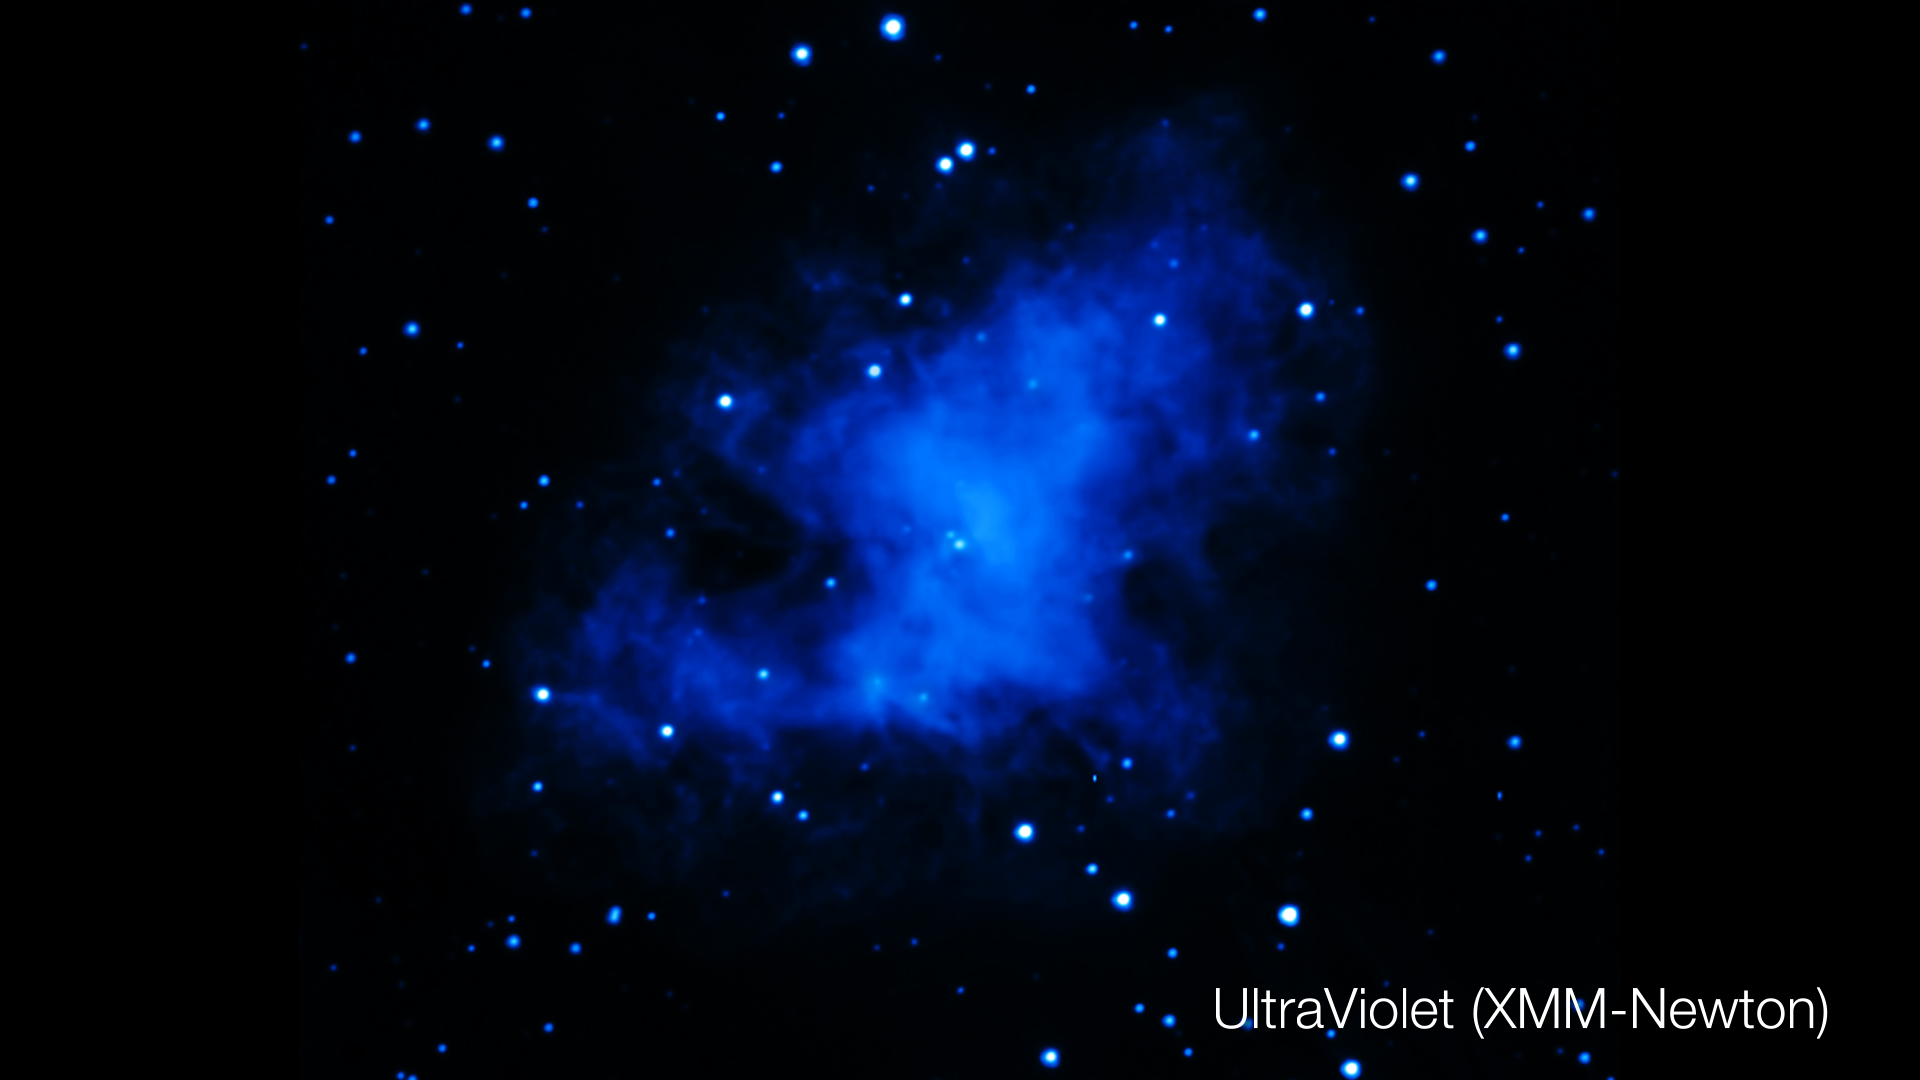 Preview Image for Vision Across the Full Spectrum: The Crab Nebula, from Radio to X-ray